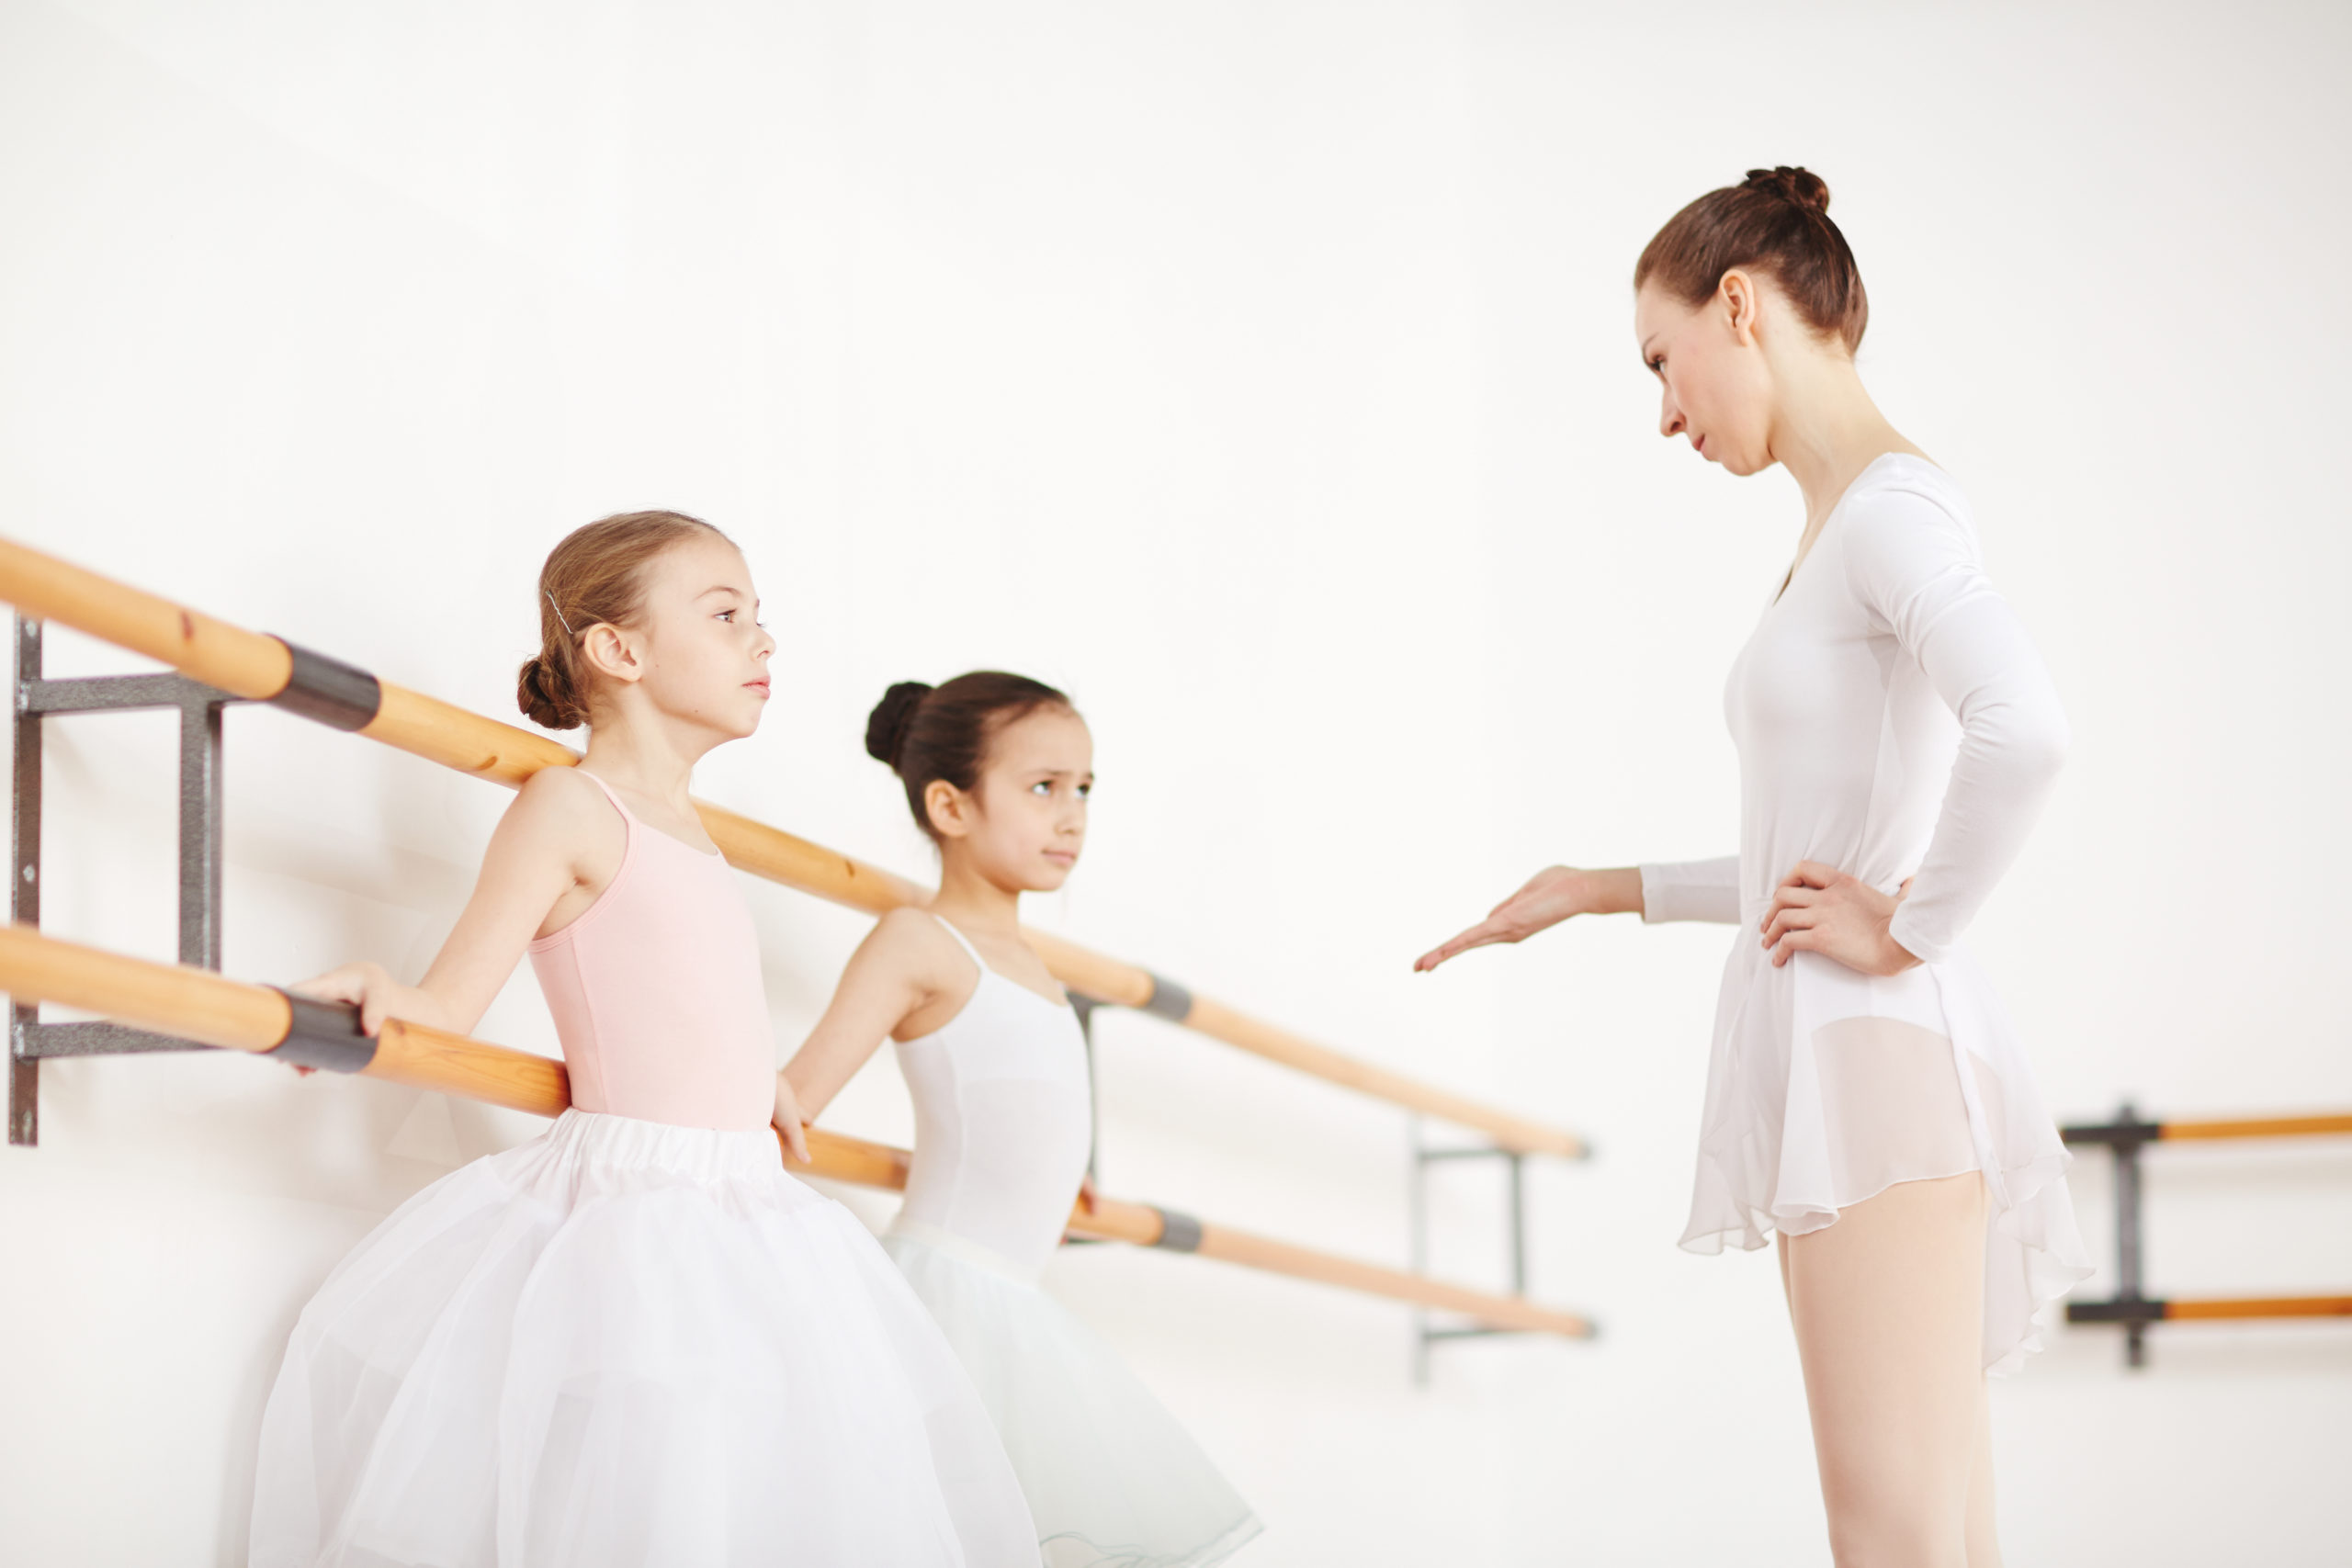 A ballet teacher in a white leotard and skirt talks sternly to two little ballet students during ballet class.